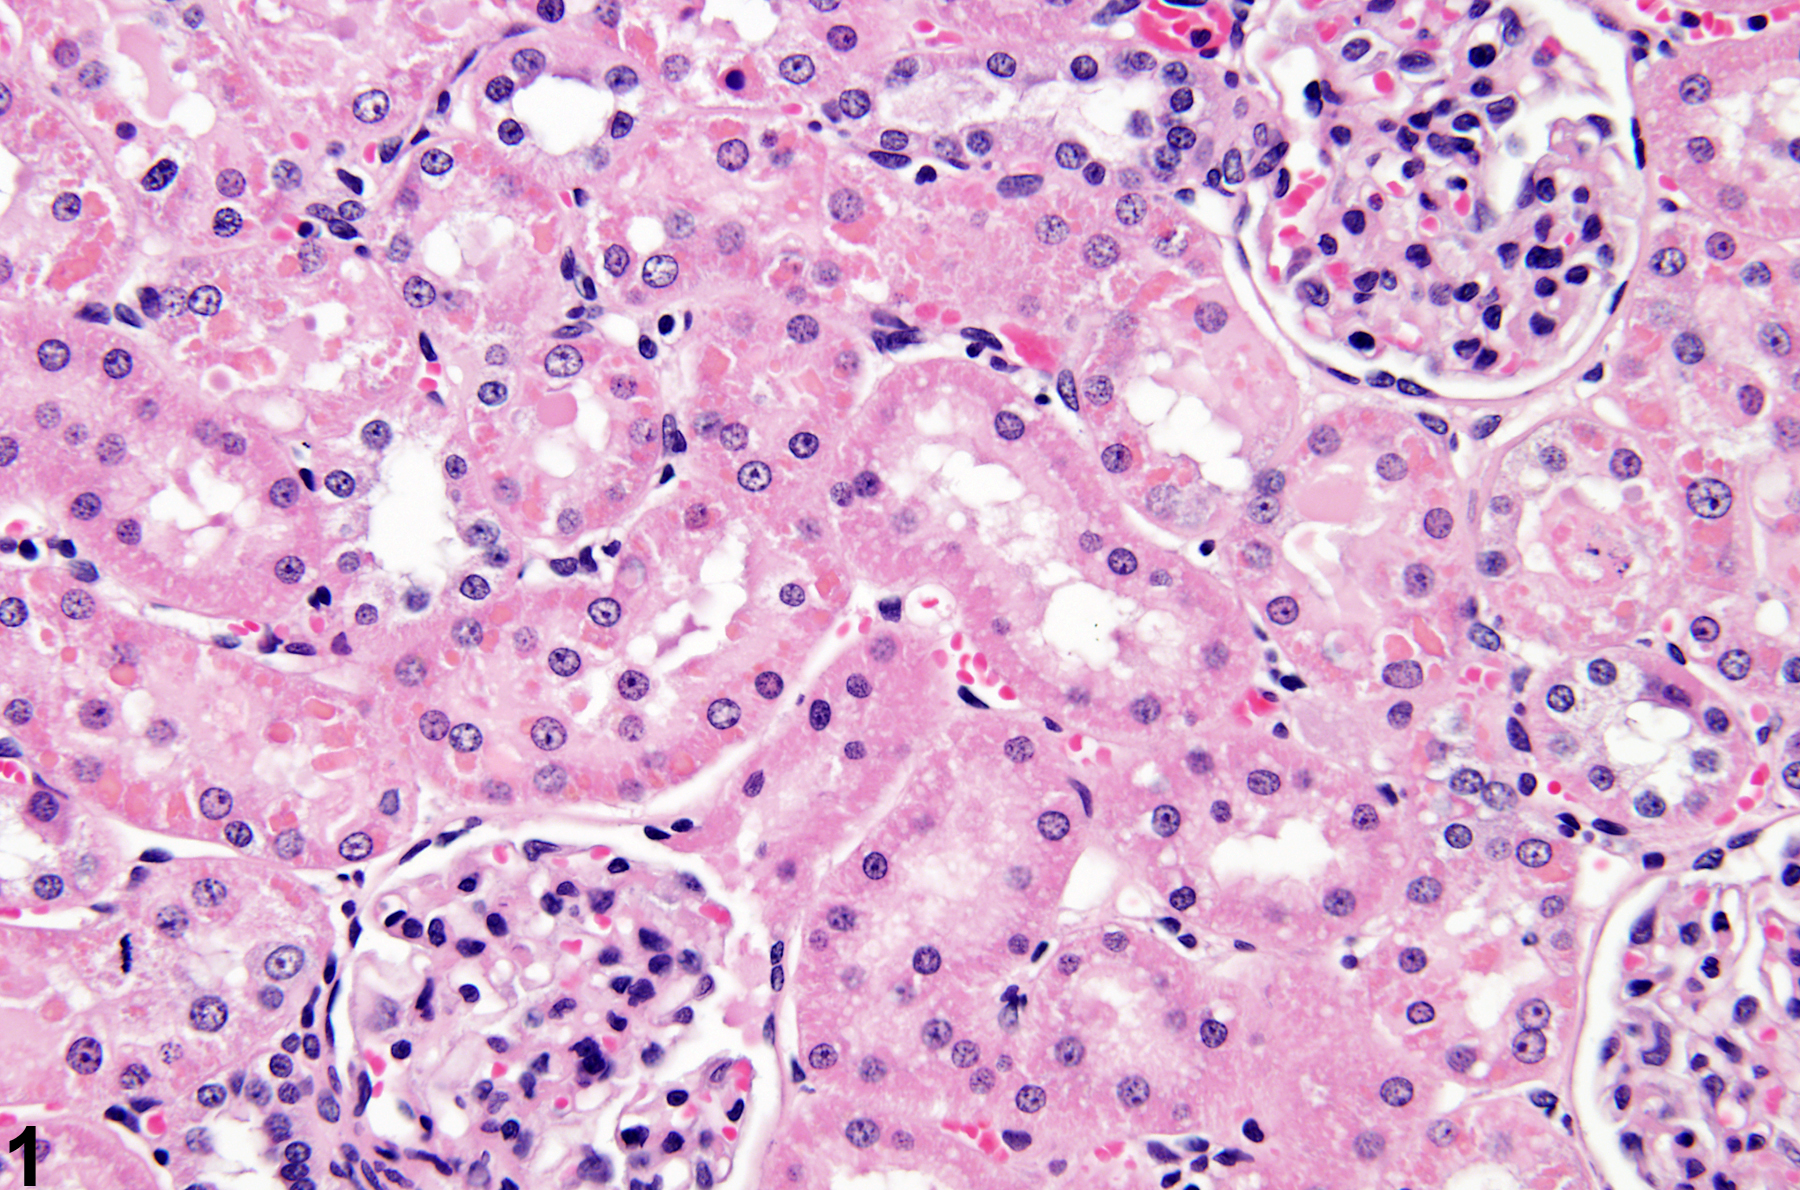 Image of renal tubule accumulation hyaline droplet in the kidney from a male F344/N rat in a subchronic study